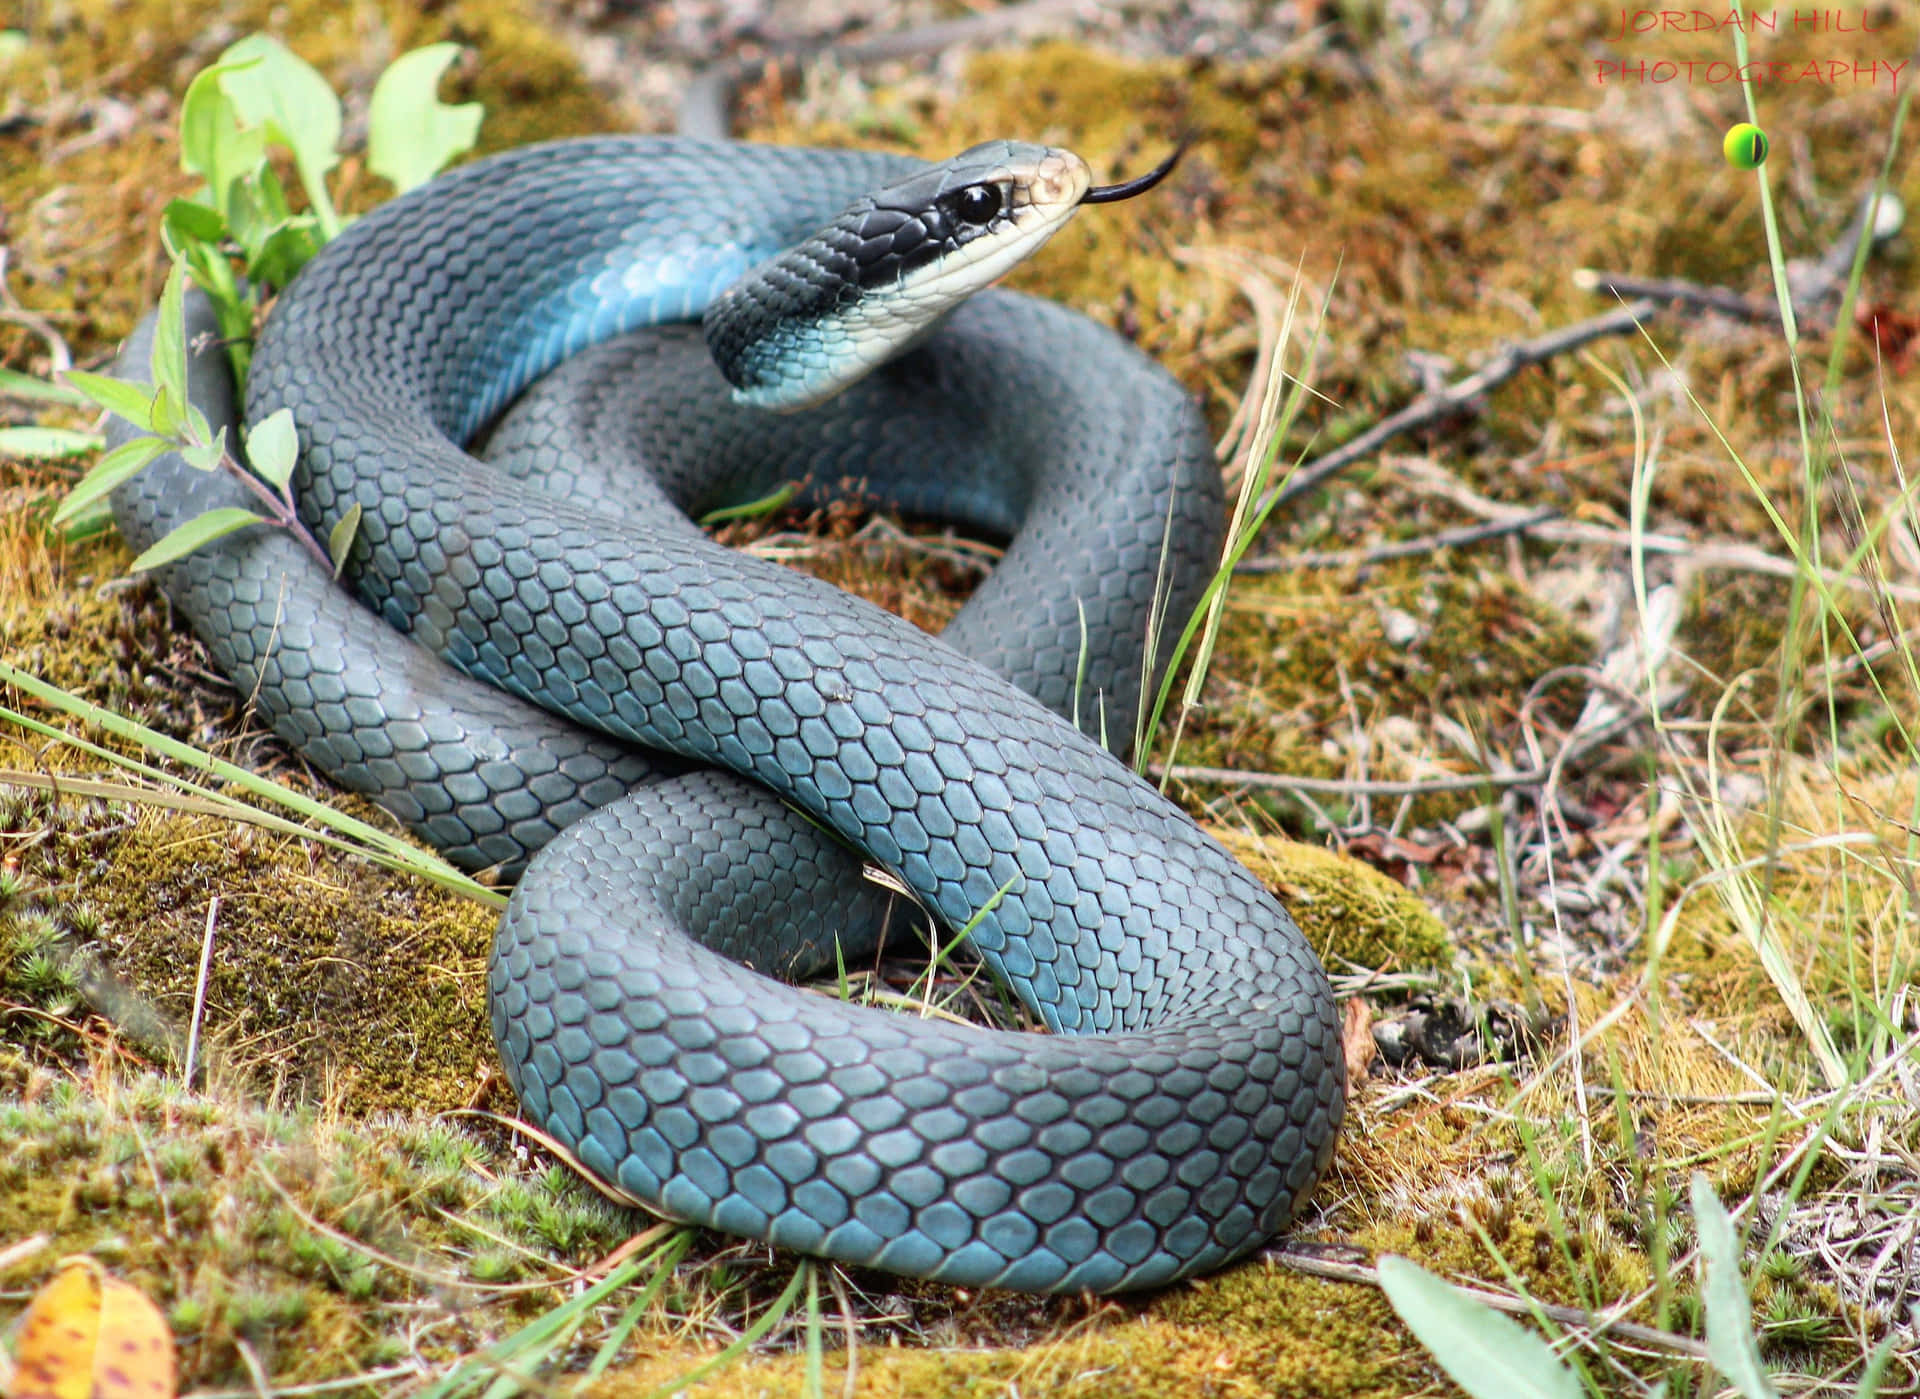 A Blue Snake Is Laying On The Ground